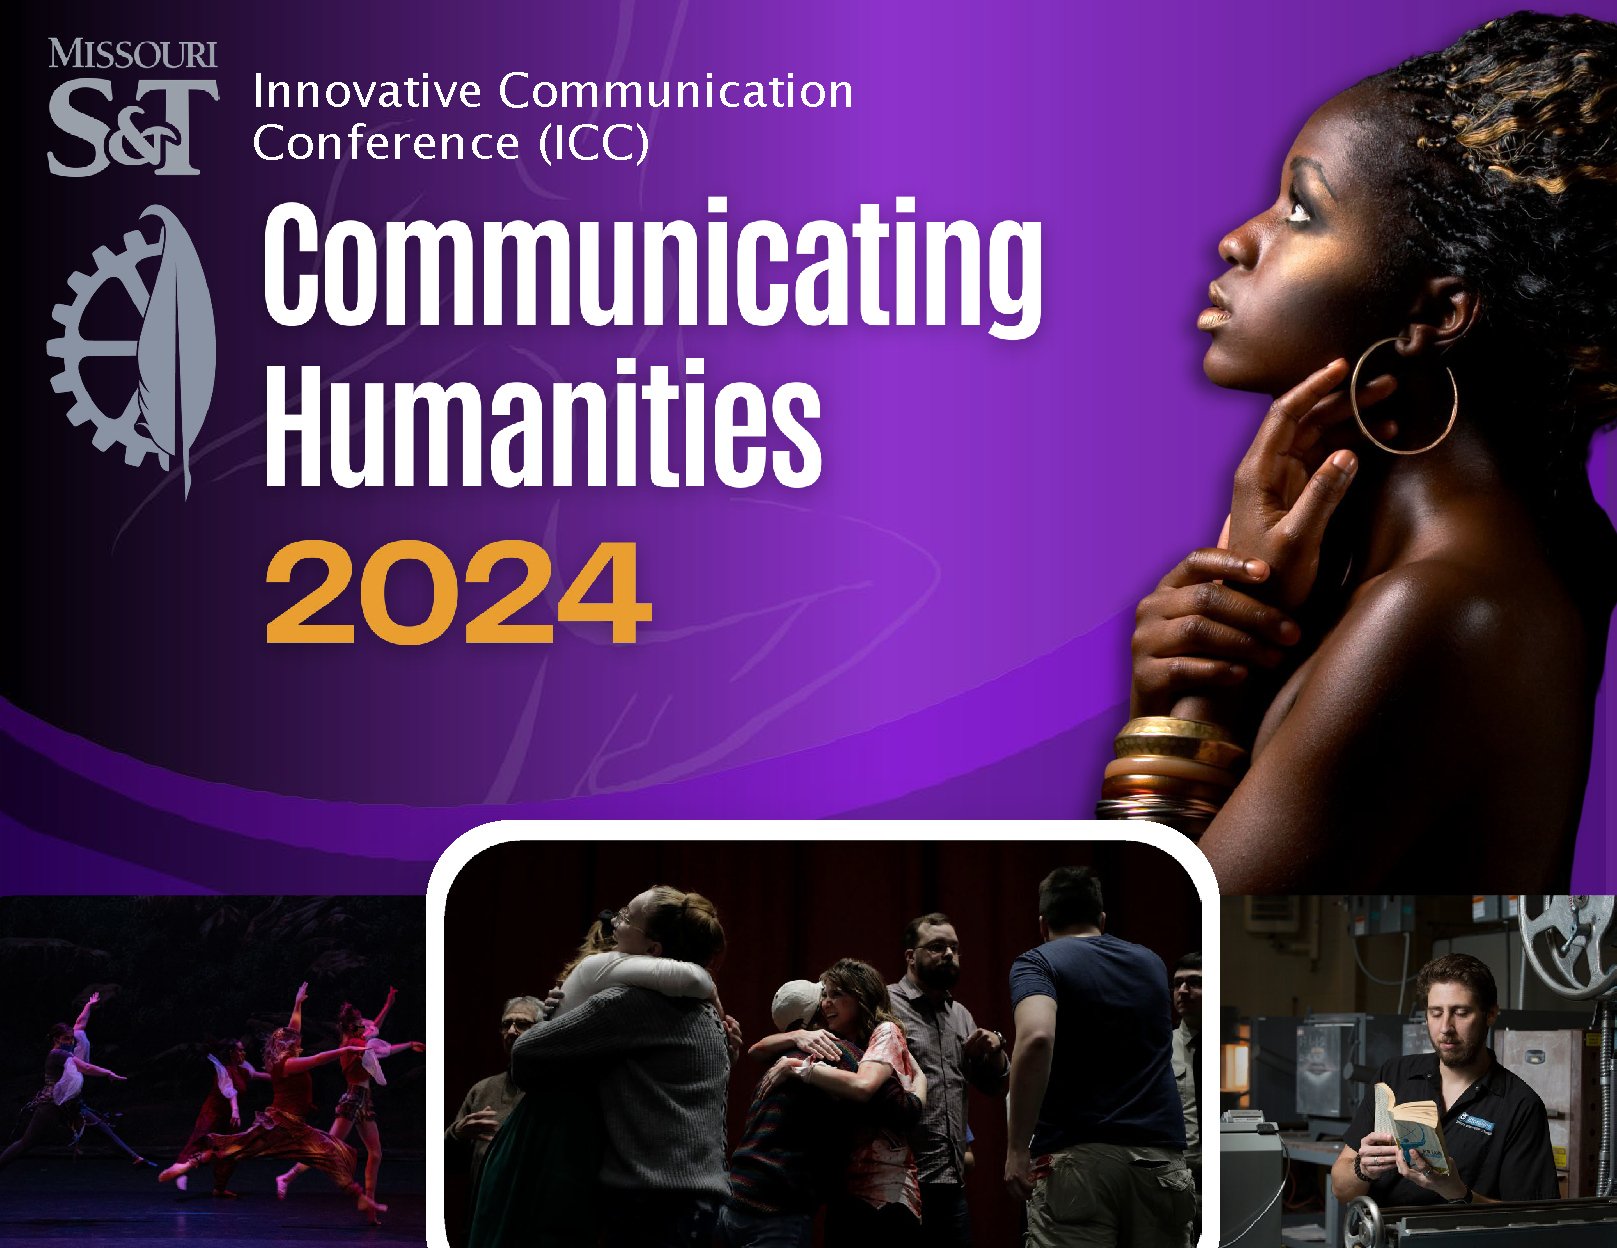 Wednesday, May 1, 2024 Communicating Humanities and Media